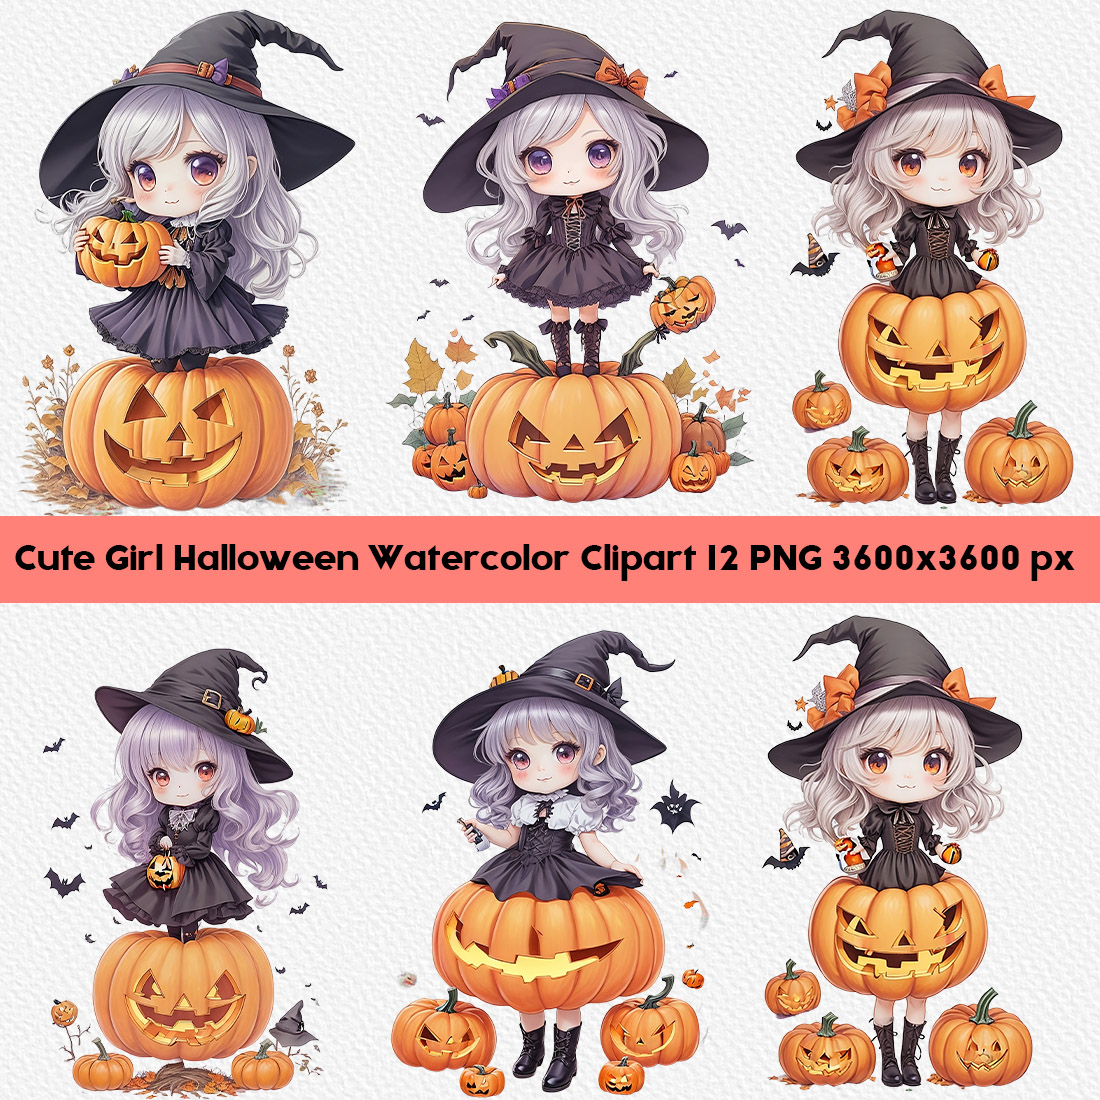 Cute Girl Halloween Watercolor Clipart cover image.